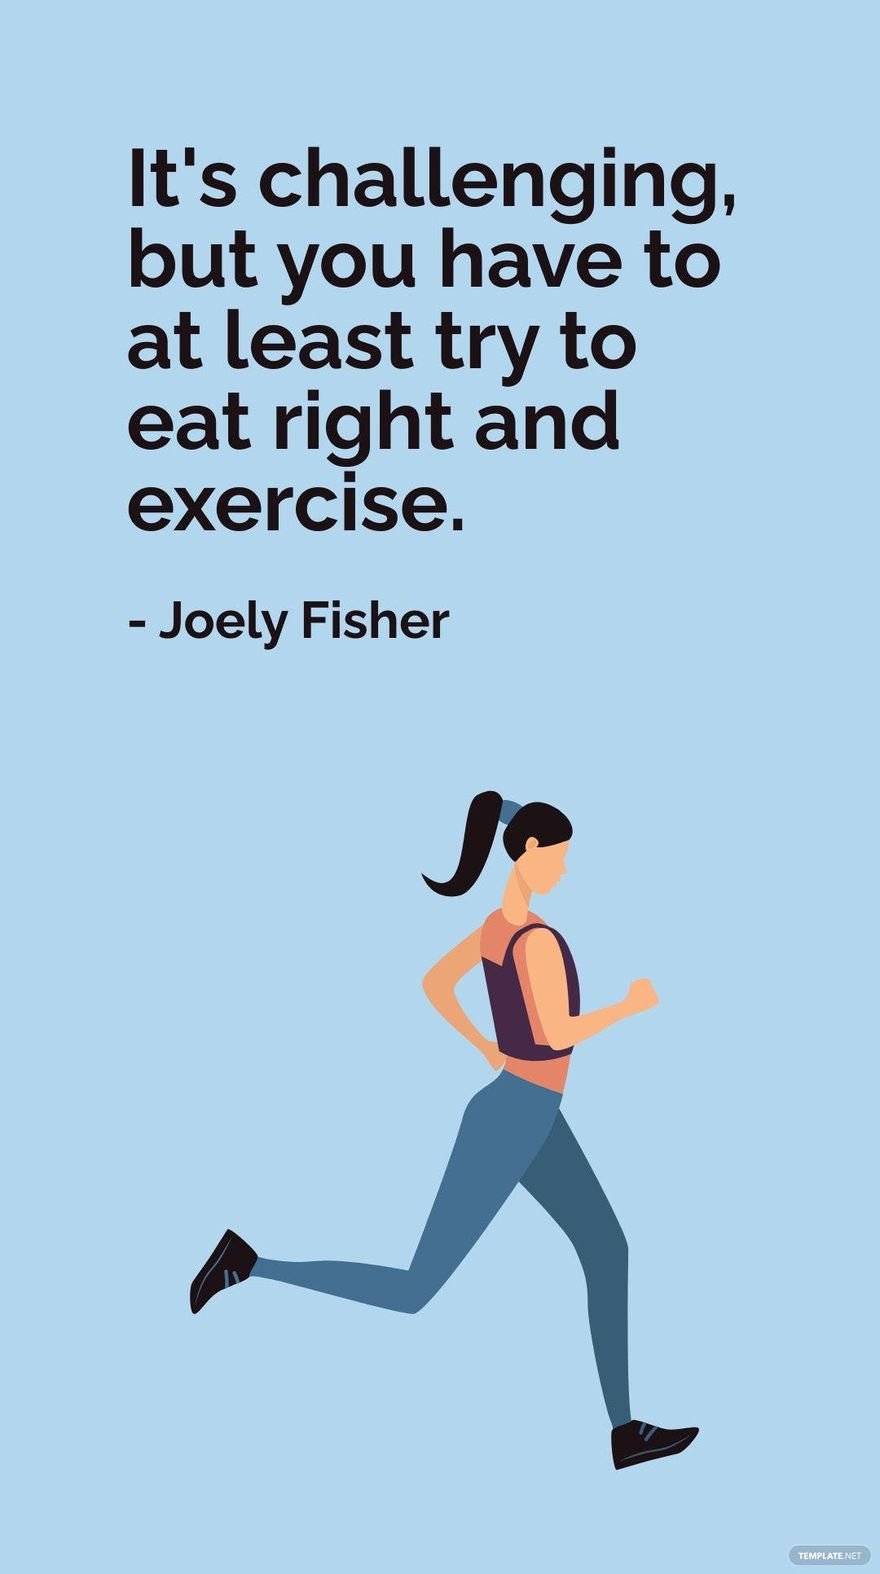 Free Joely Fisher - It's challenging, but you have to at least try to eat right and exercise. in JPG